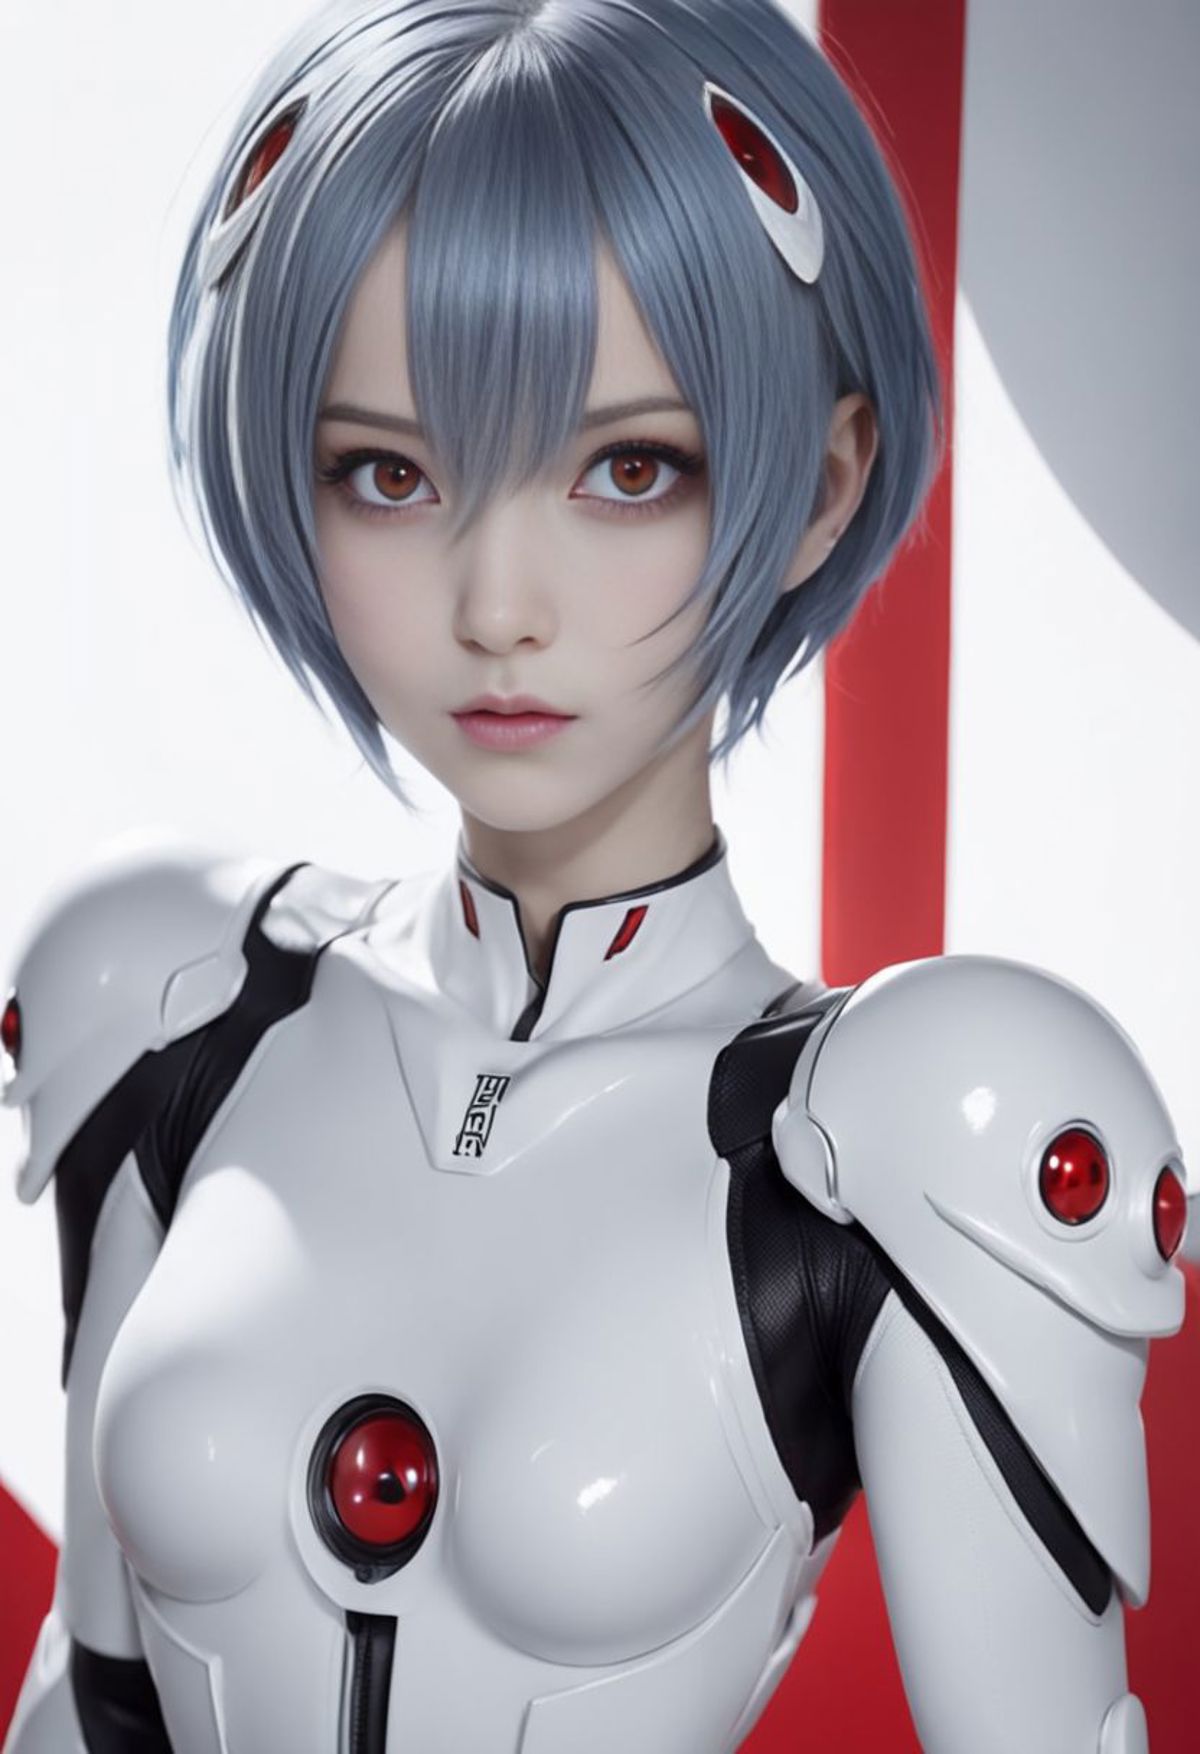 AI model image by ringtmp674